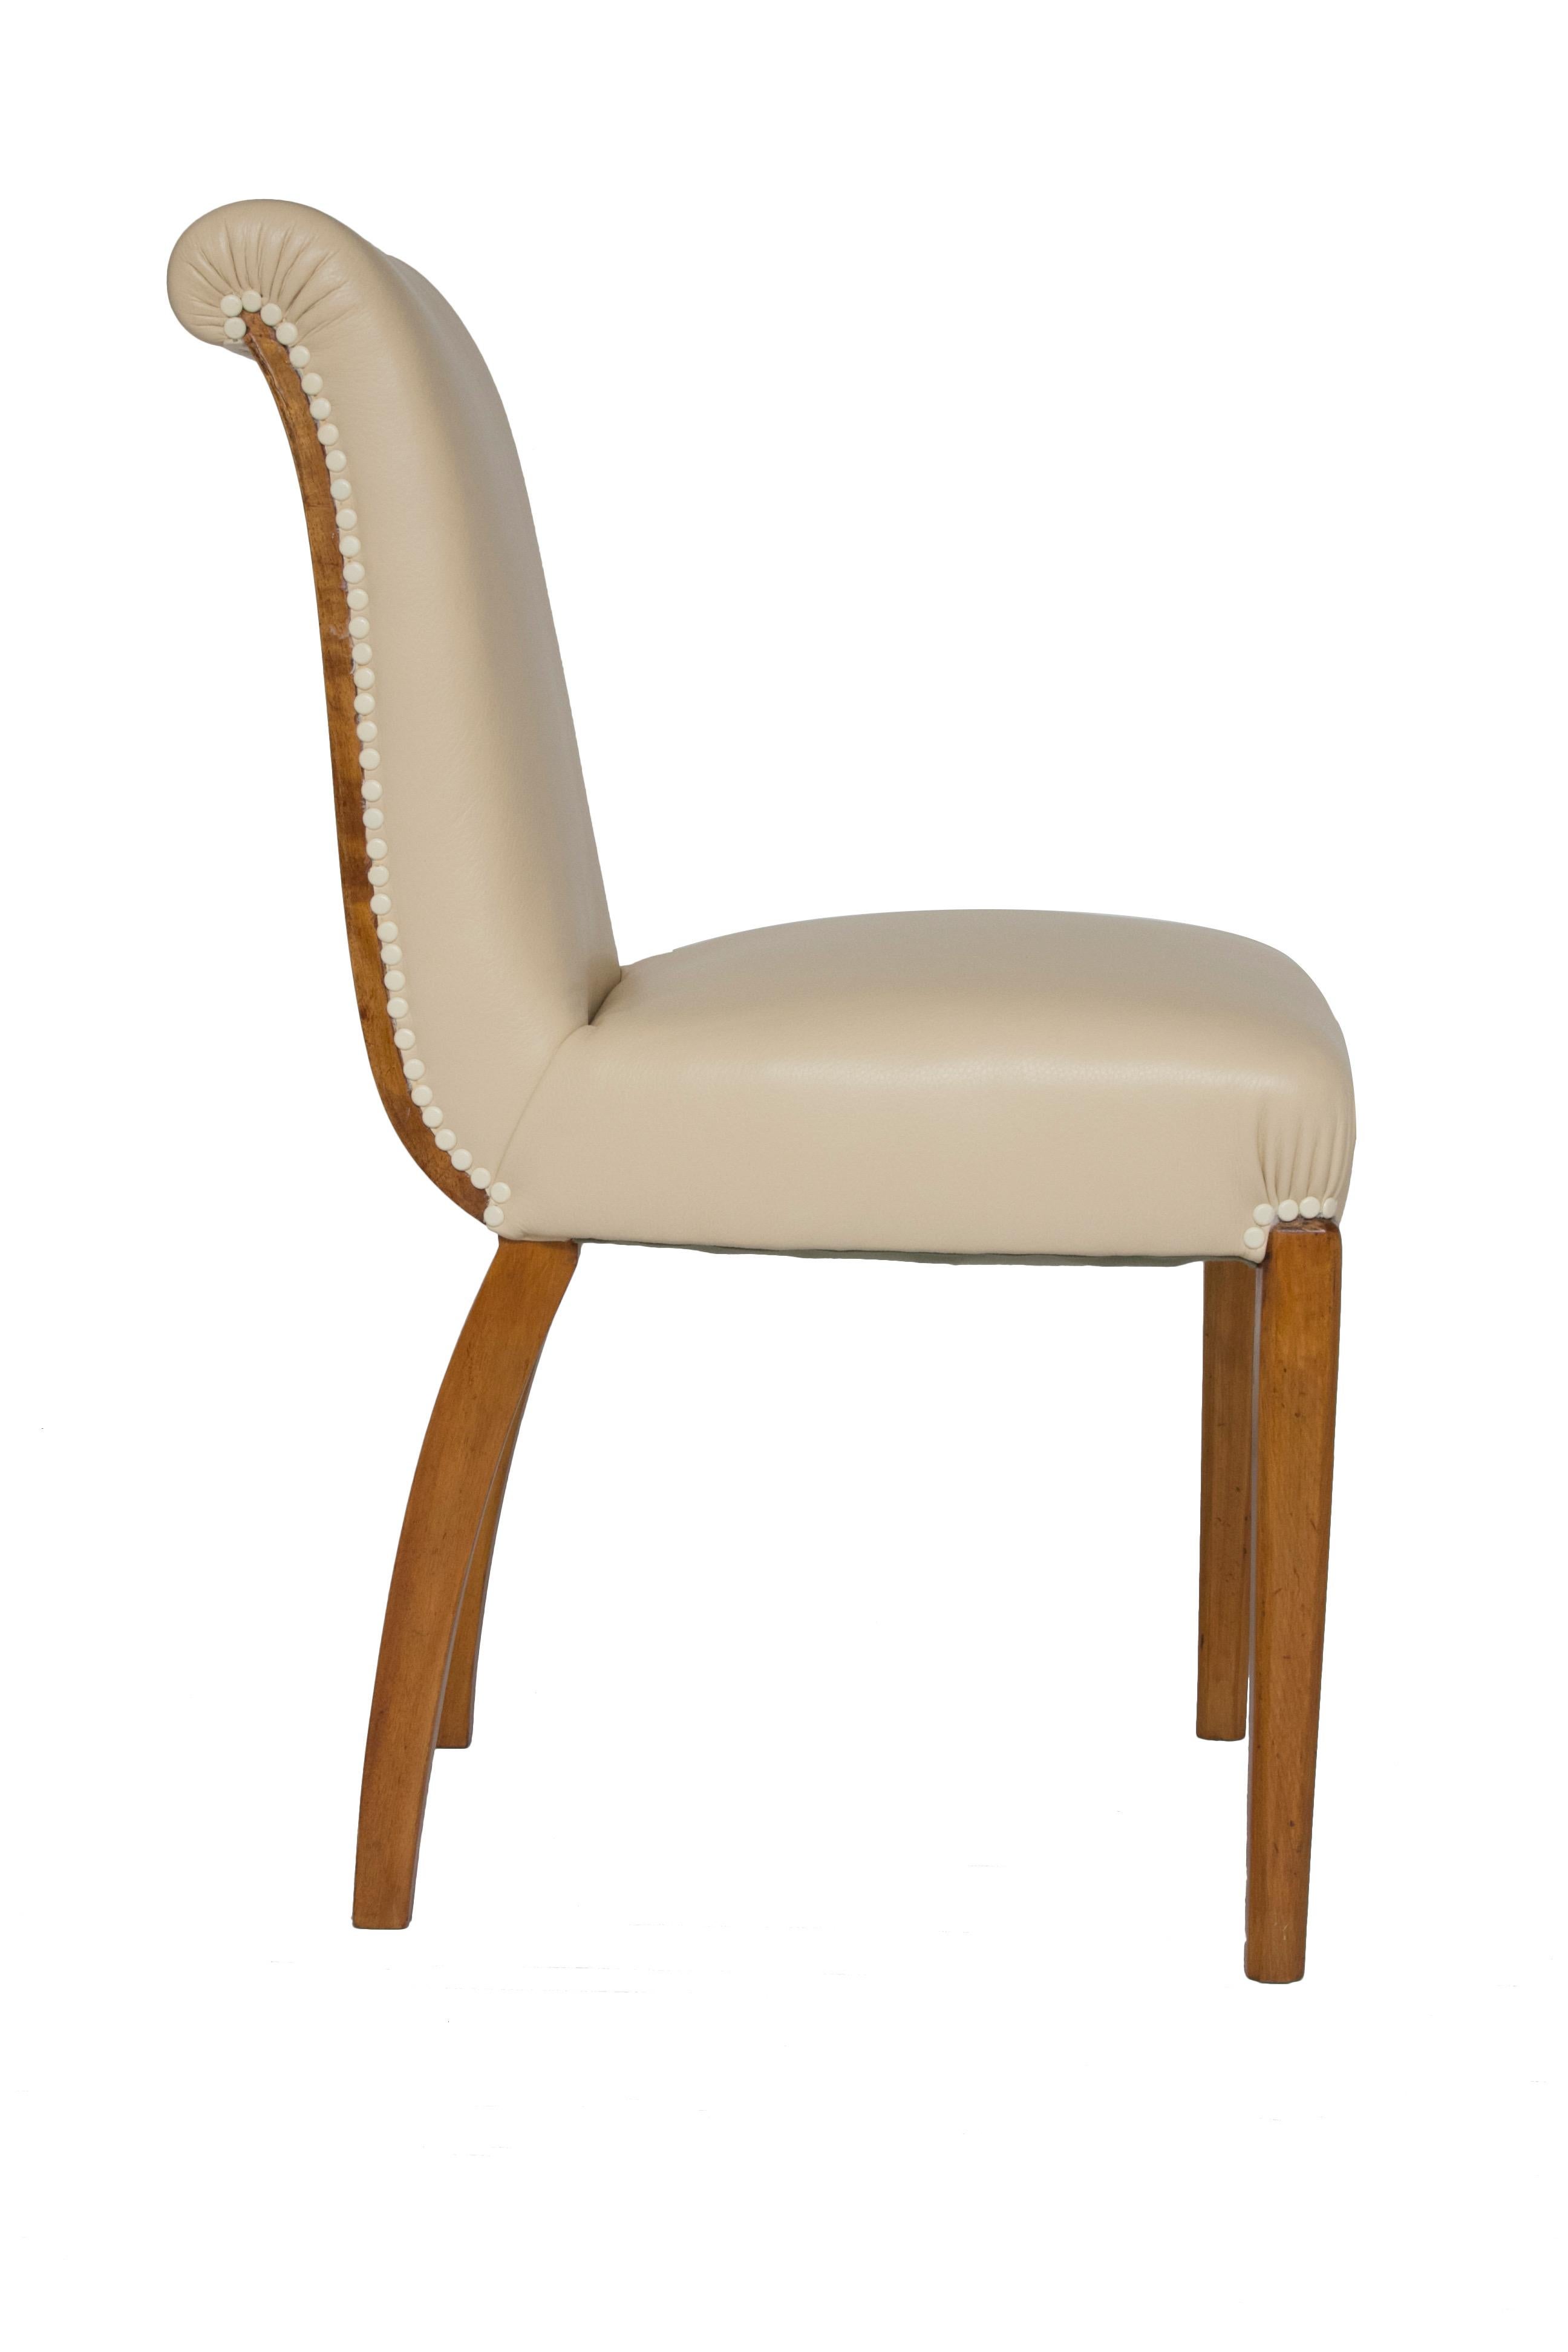 Art Deco chair
Art Deco satin Maple roll top chair newly upholstered in a soft ivory leather.
Designed by Hille
Measures: H 88 cm, W 52 cm, D 56 cm.
British, circa 1930.